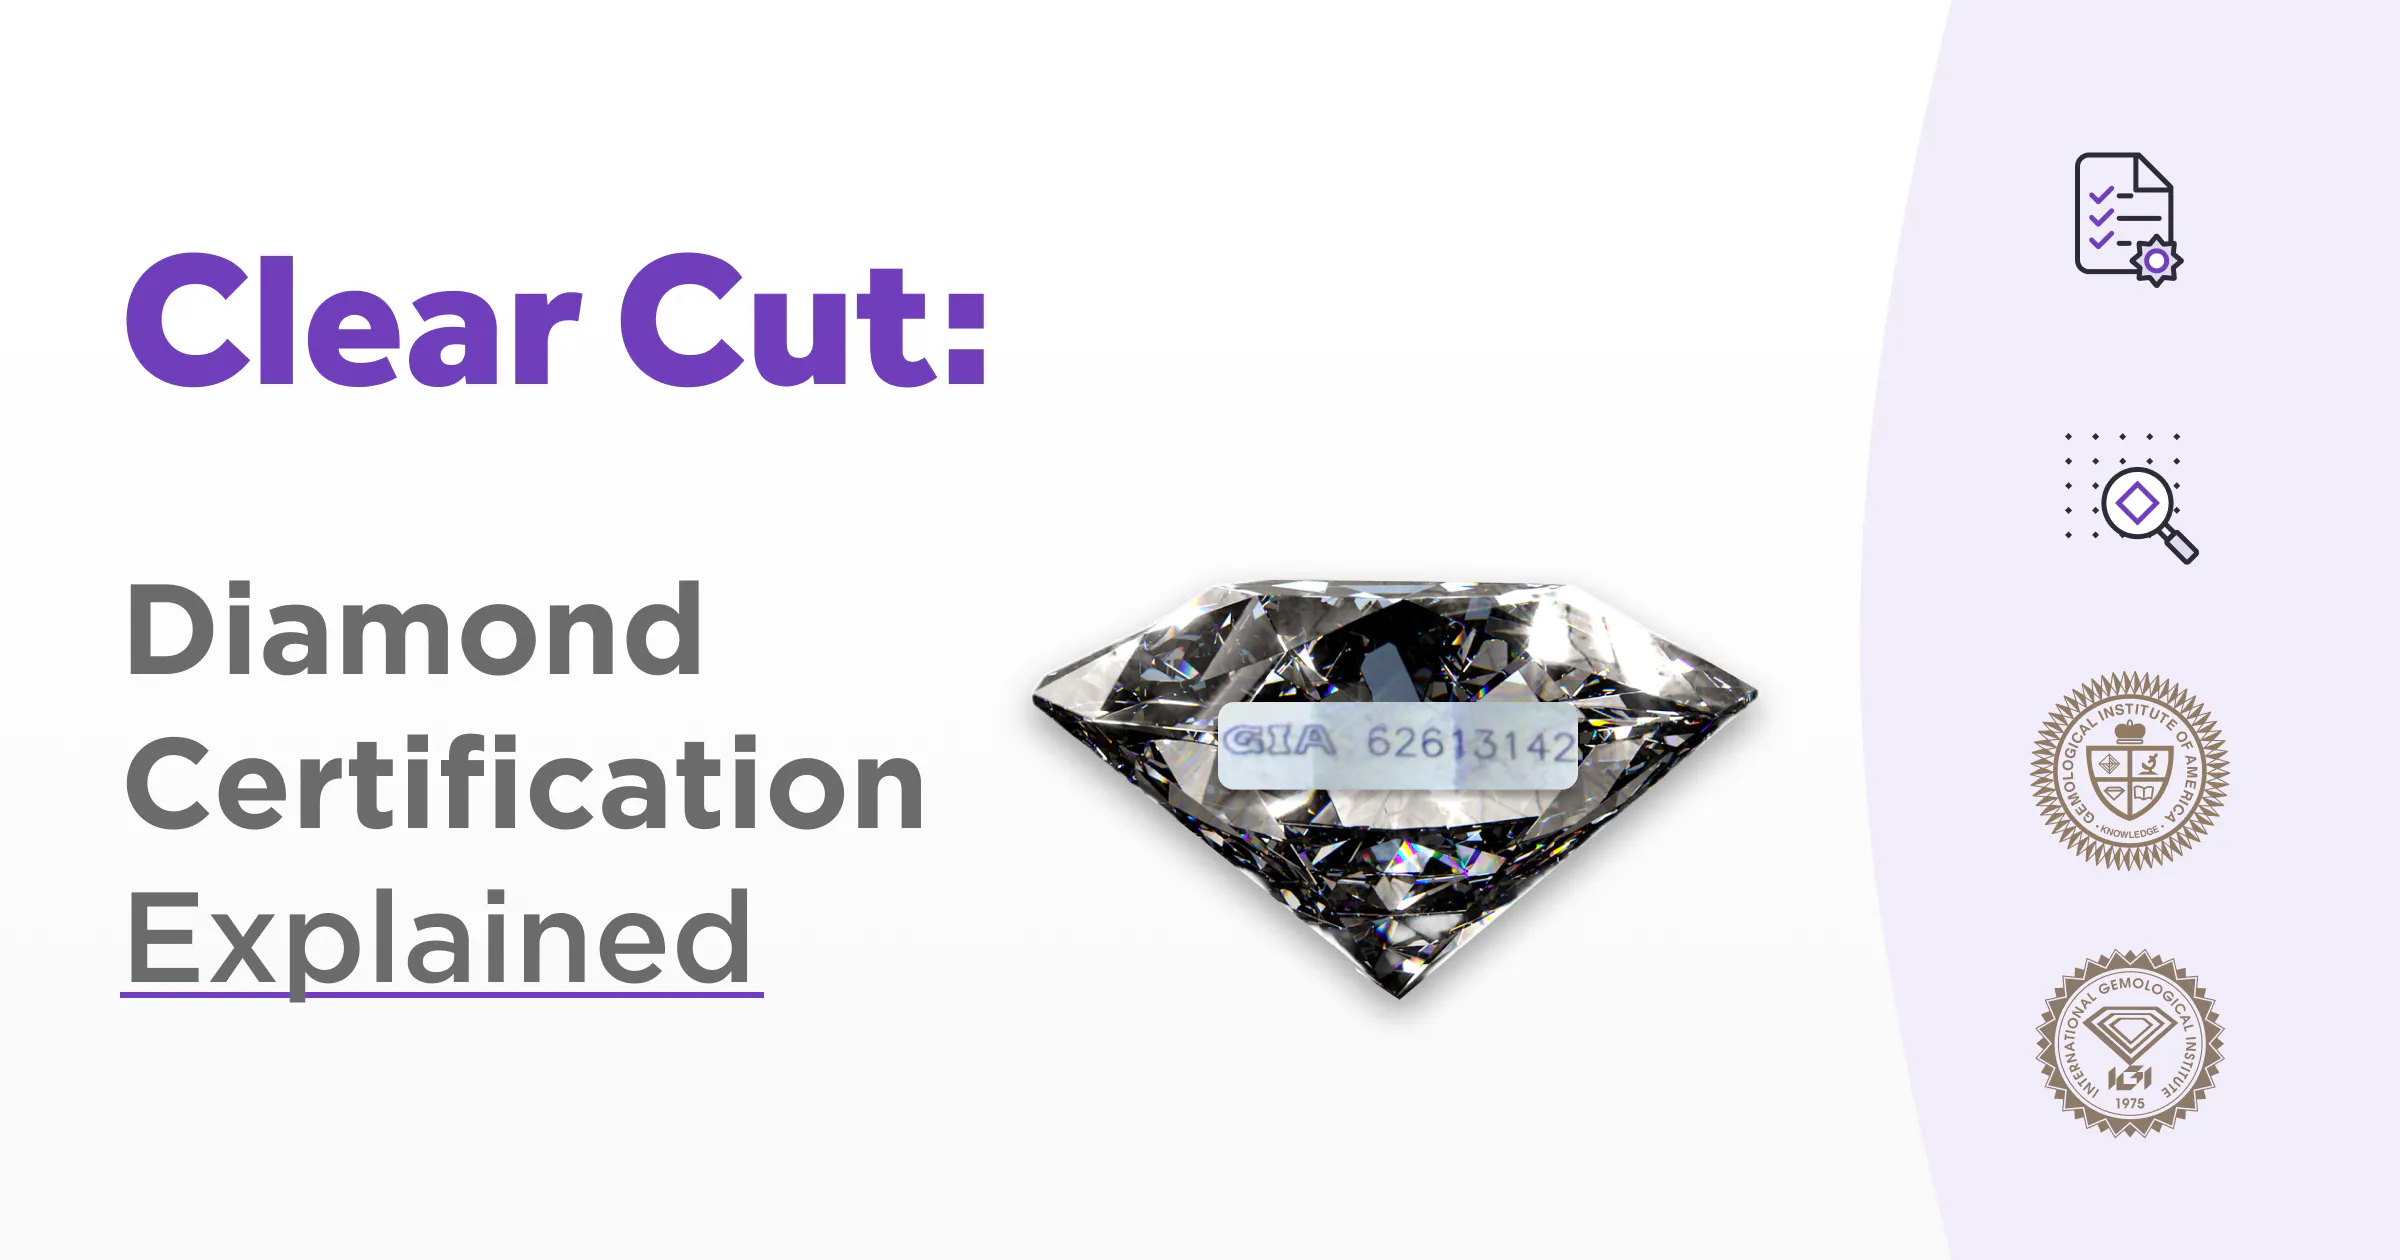 Clear Cut Diamond Certification Explained Commodity Diamond Standard July 2022 Industry Insights Blog